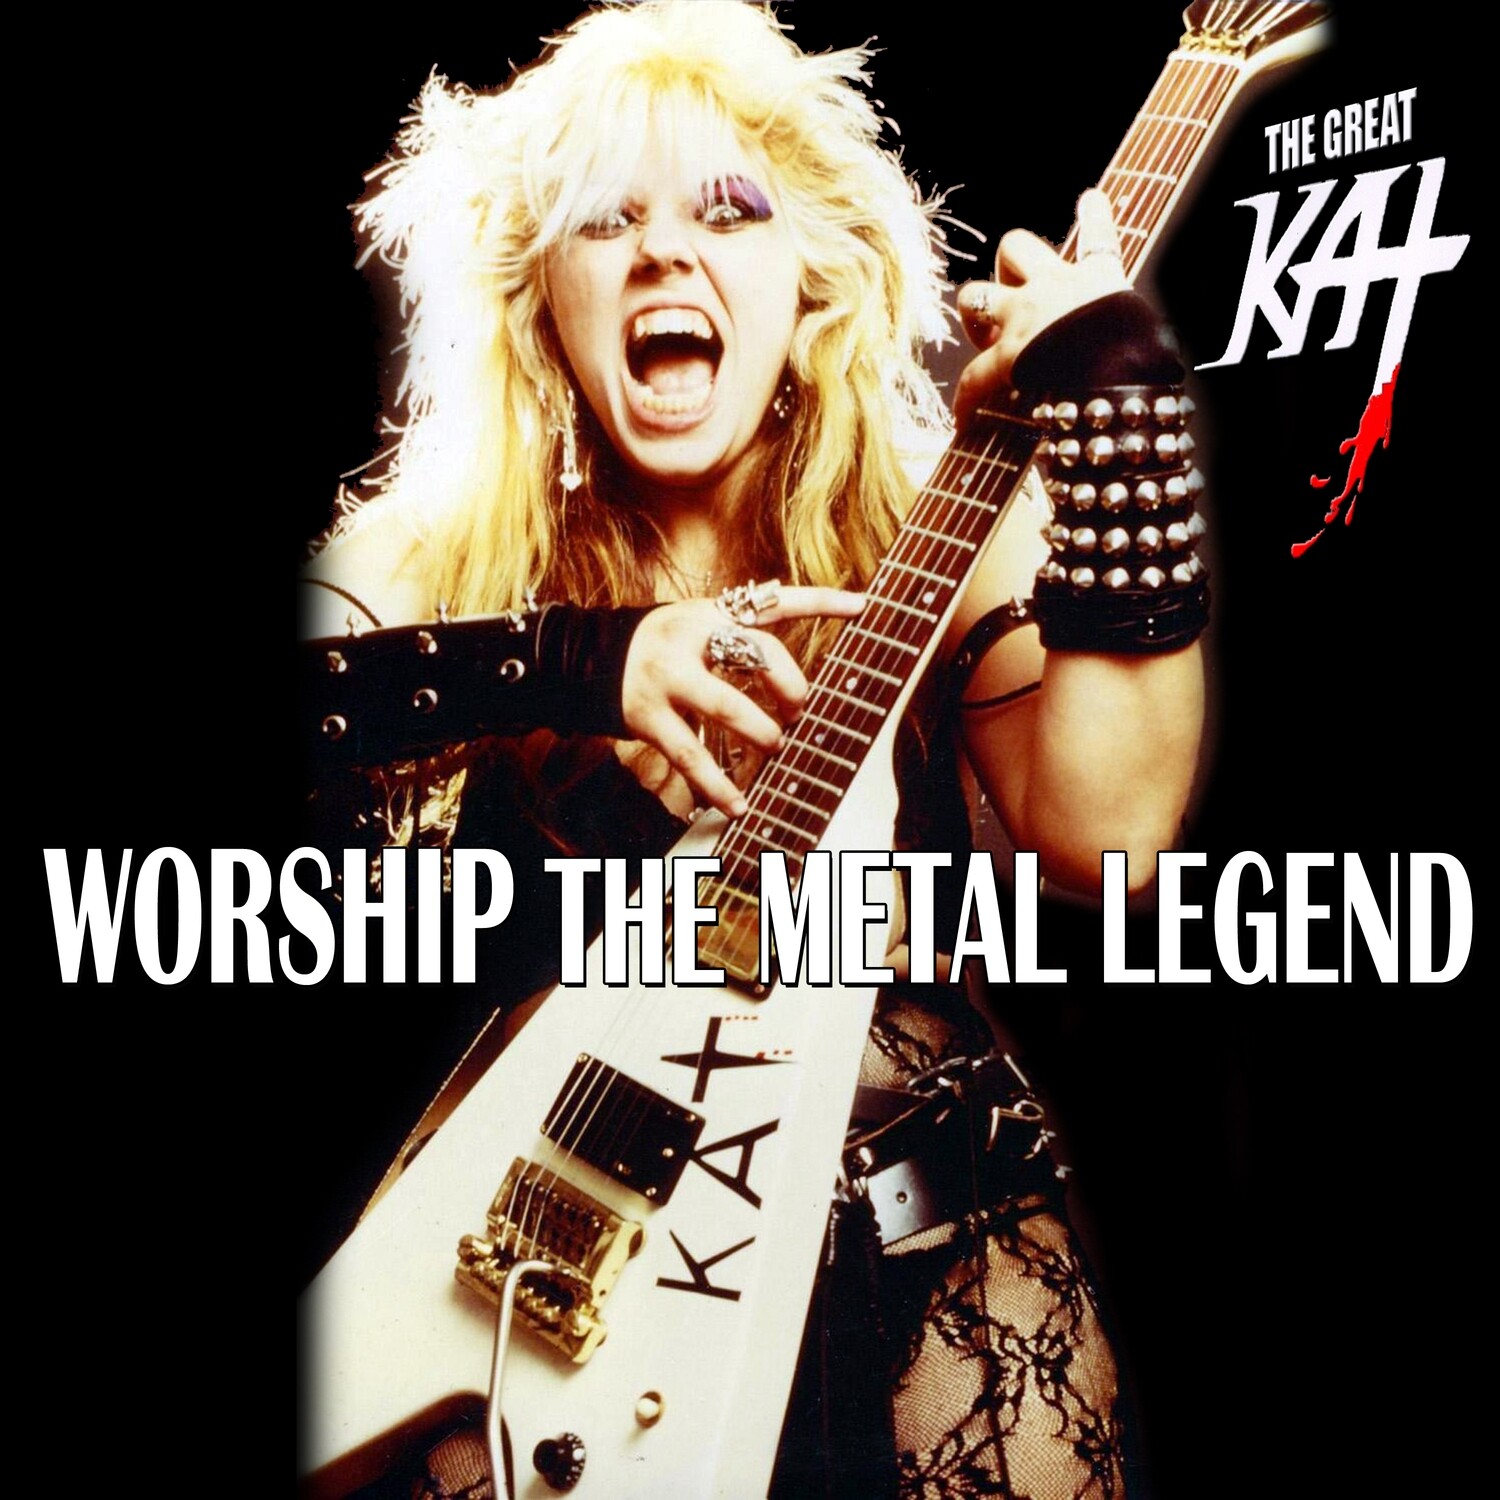 New “WORSHIP THE METAL LEGEND” 14-Song CD Album (21 Min.) by THE GREAT KAT!  PERSONALIZED AUTOGRAPHED by THE GREAT KAT To Customer! BEETHOVEN, BACH,  MOZART, THRASH & MORE! The Great Kat Has